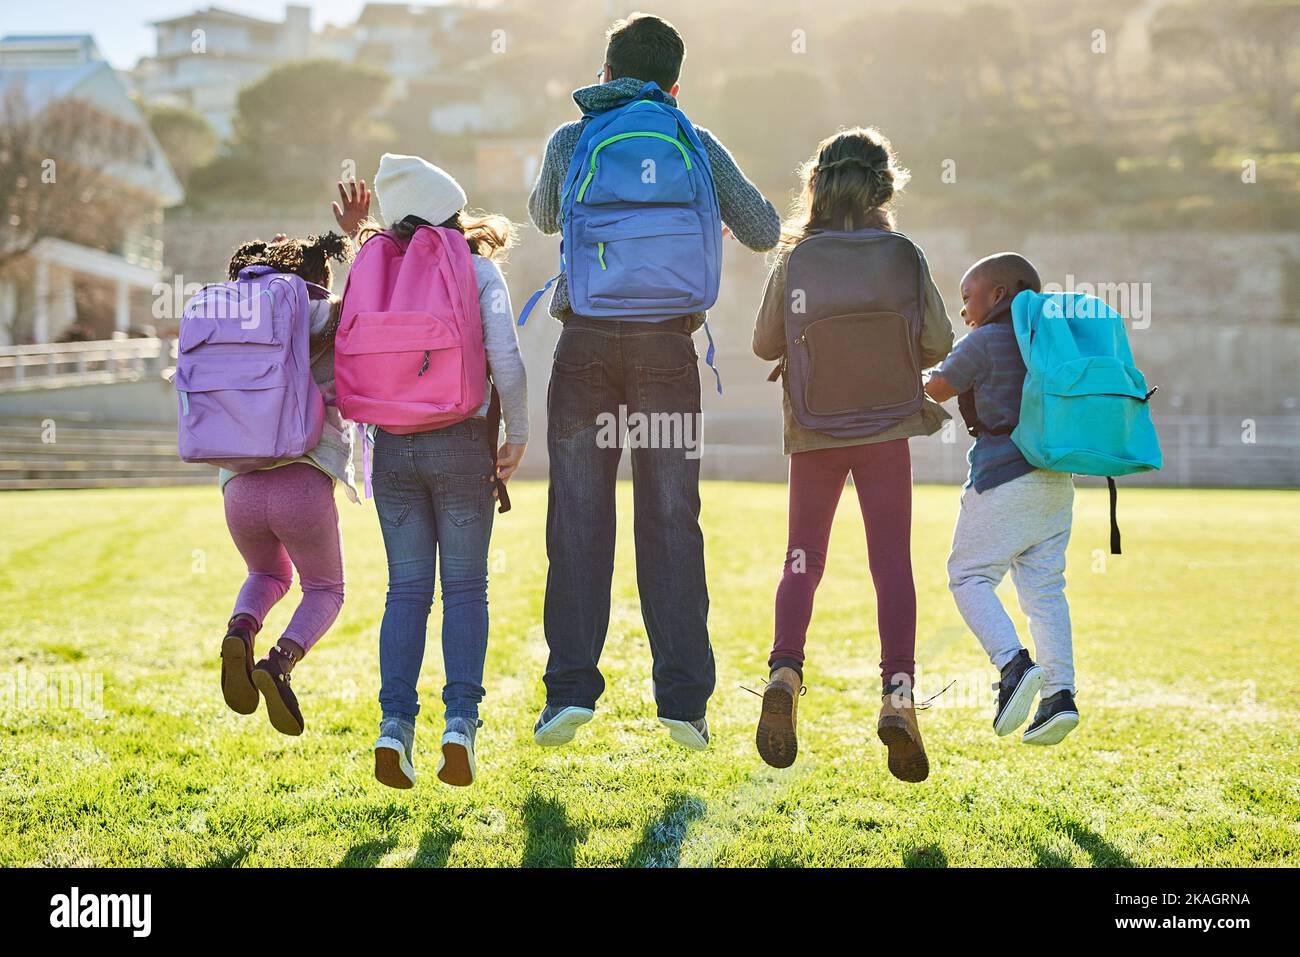 Jumping into a day of fun and learning. Rearview shot of a group of elementary school kids playing together outdoors. Stock Photo